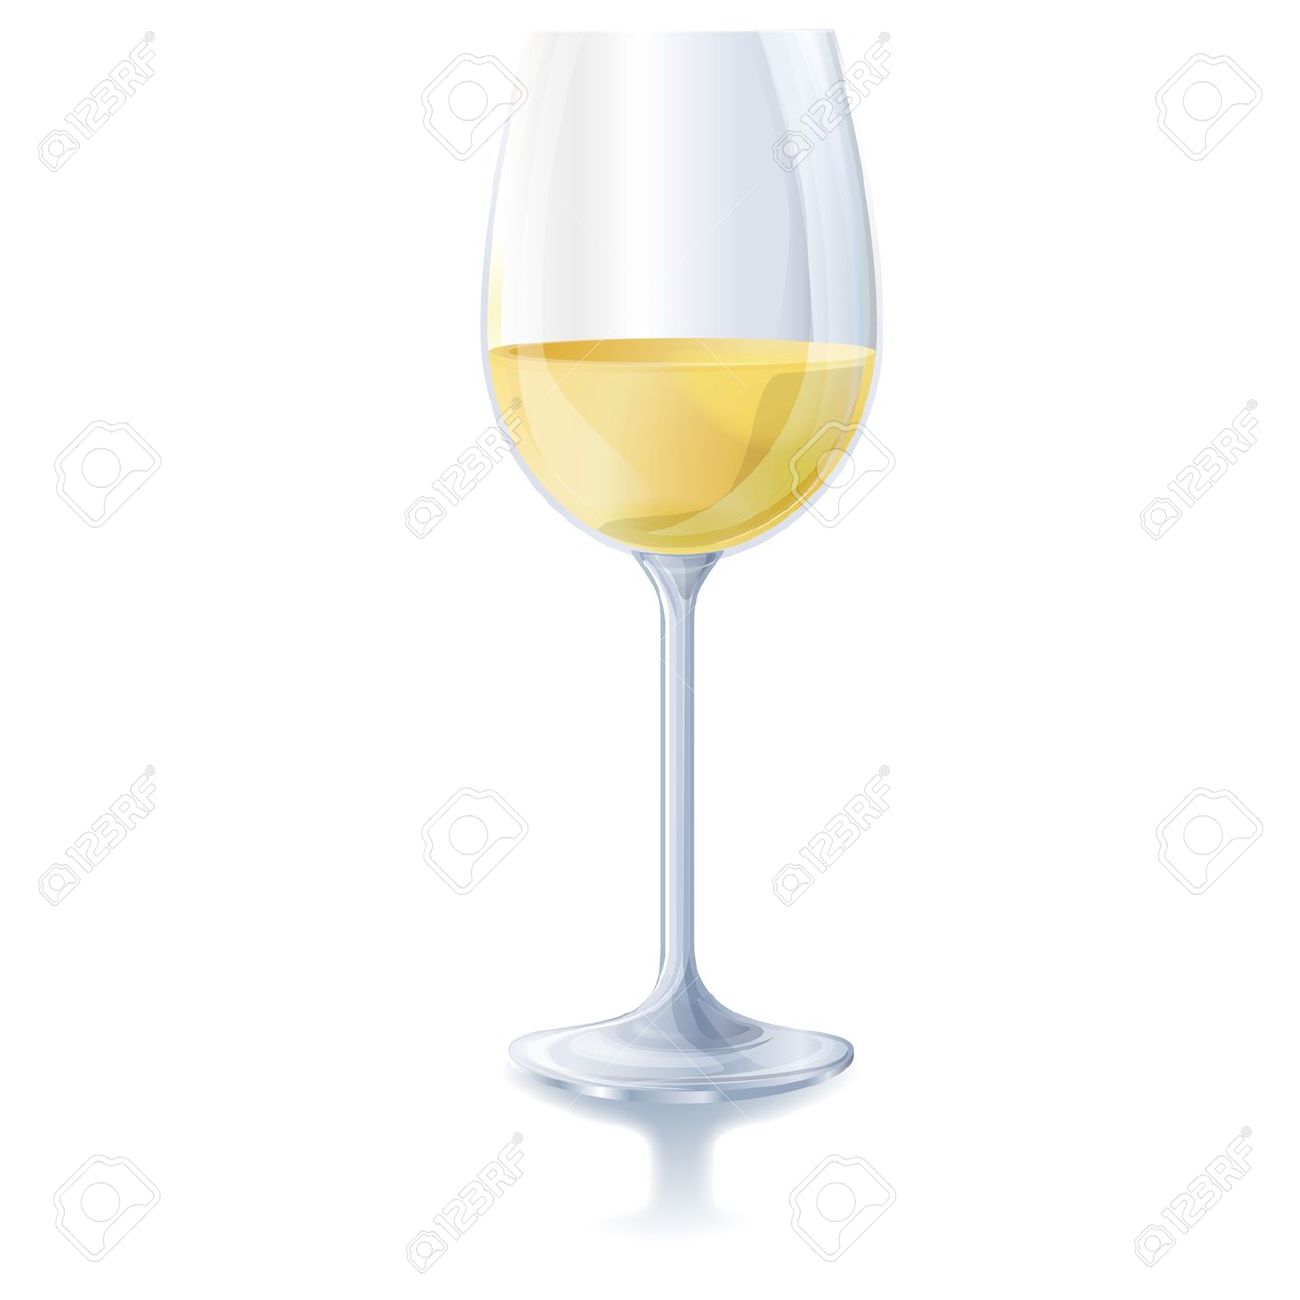 wine glass clip art pictures - photo #28